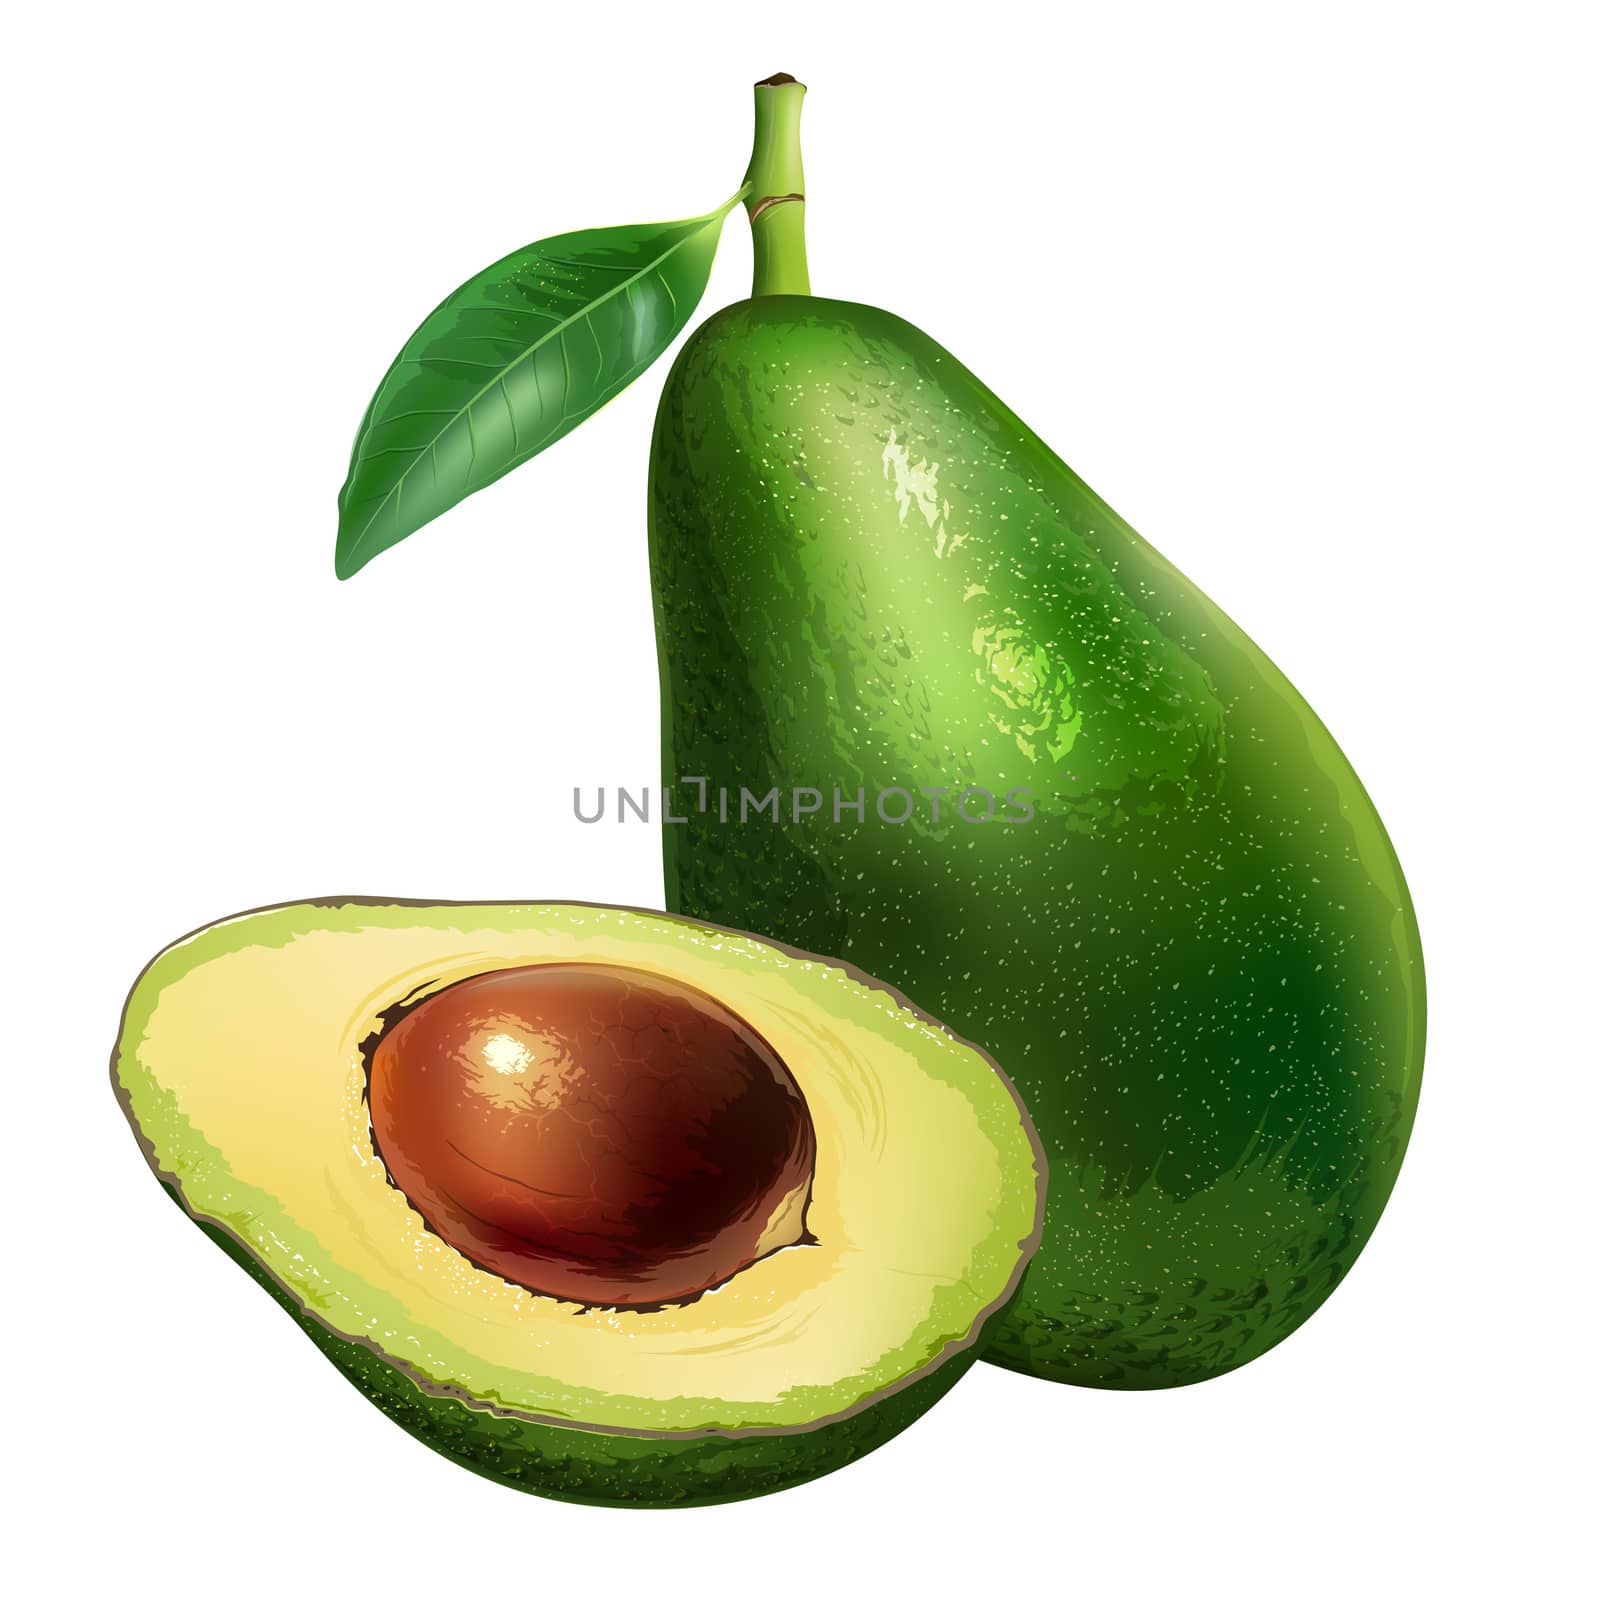 Avocado with leaves. Isolated illustration on white background.